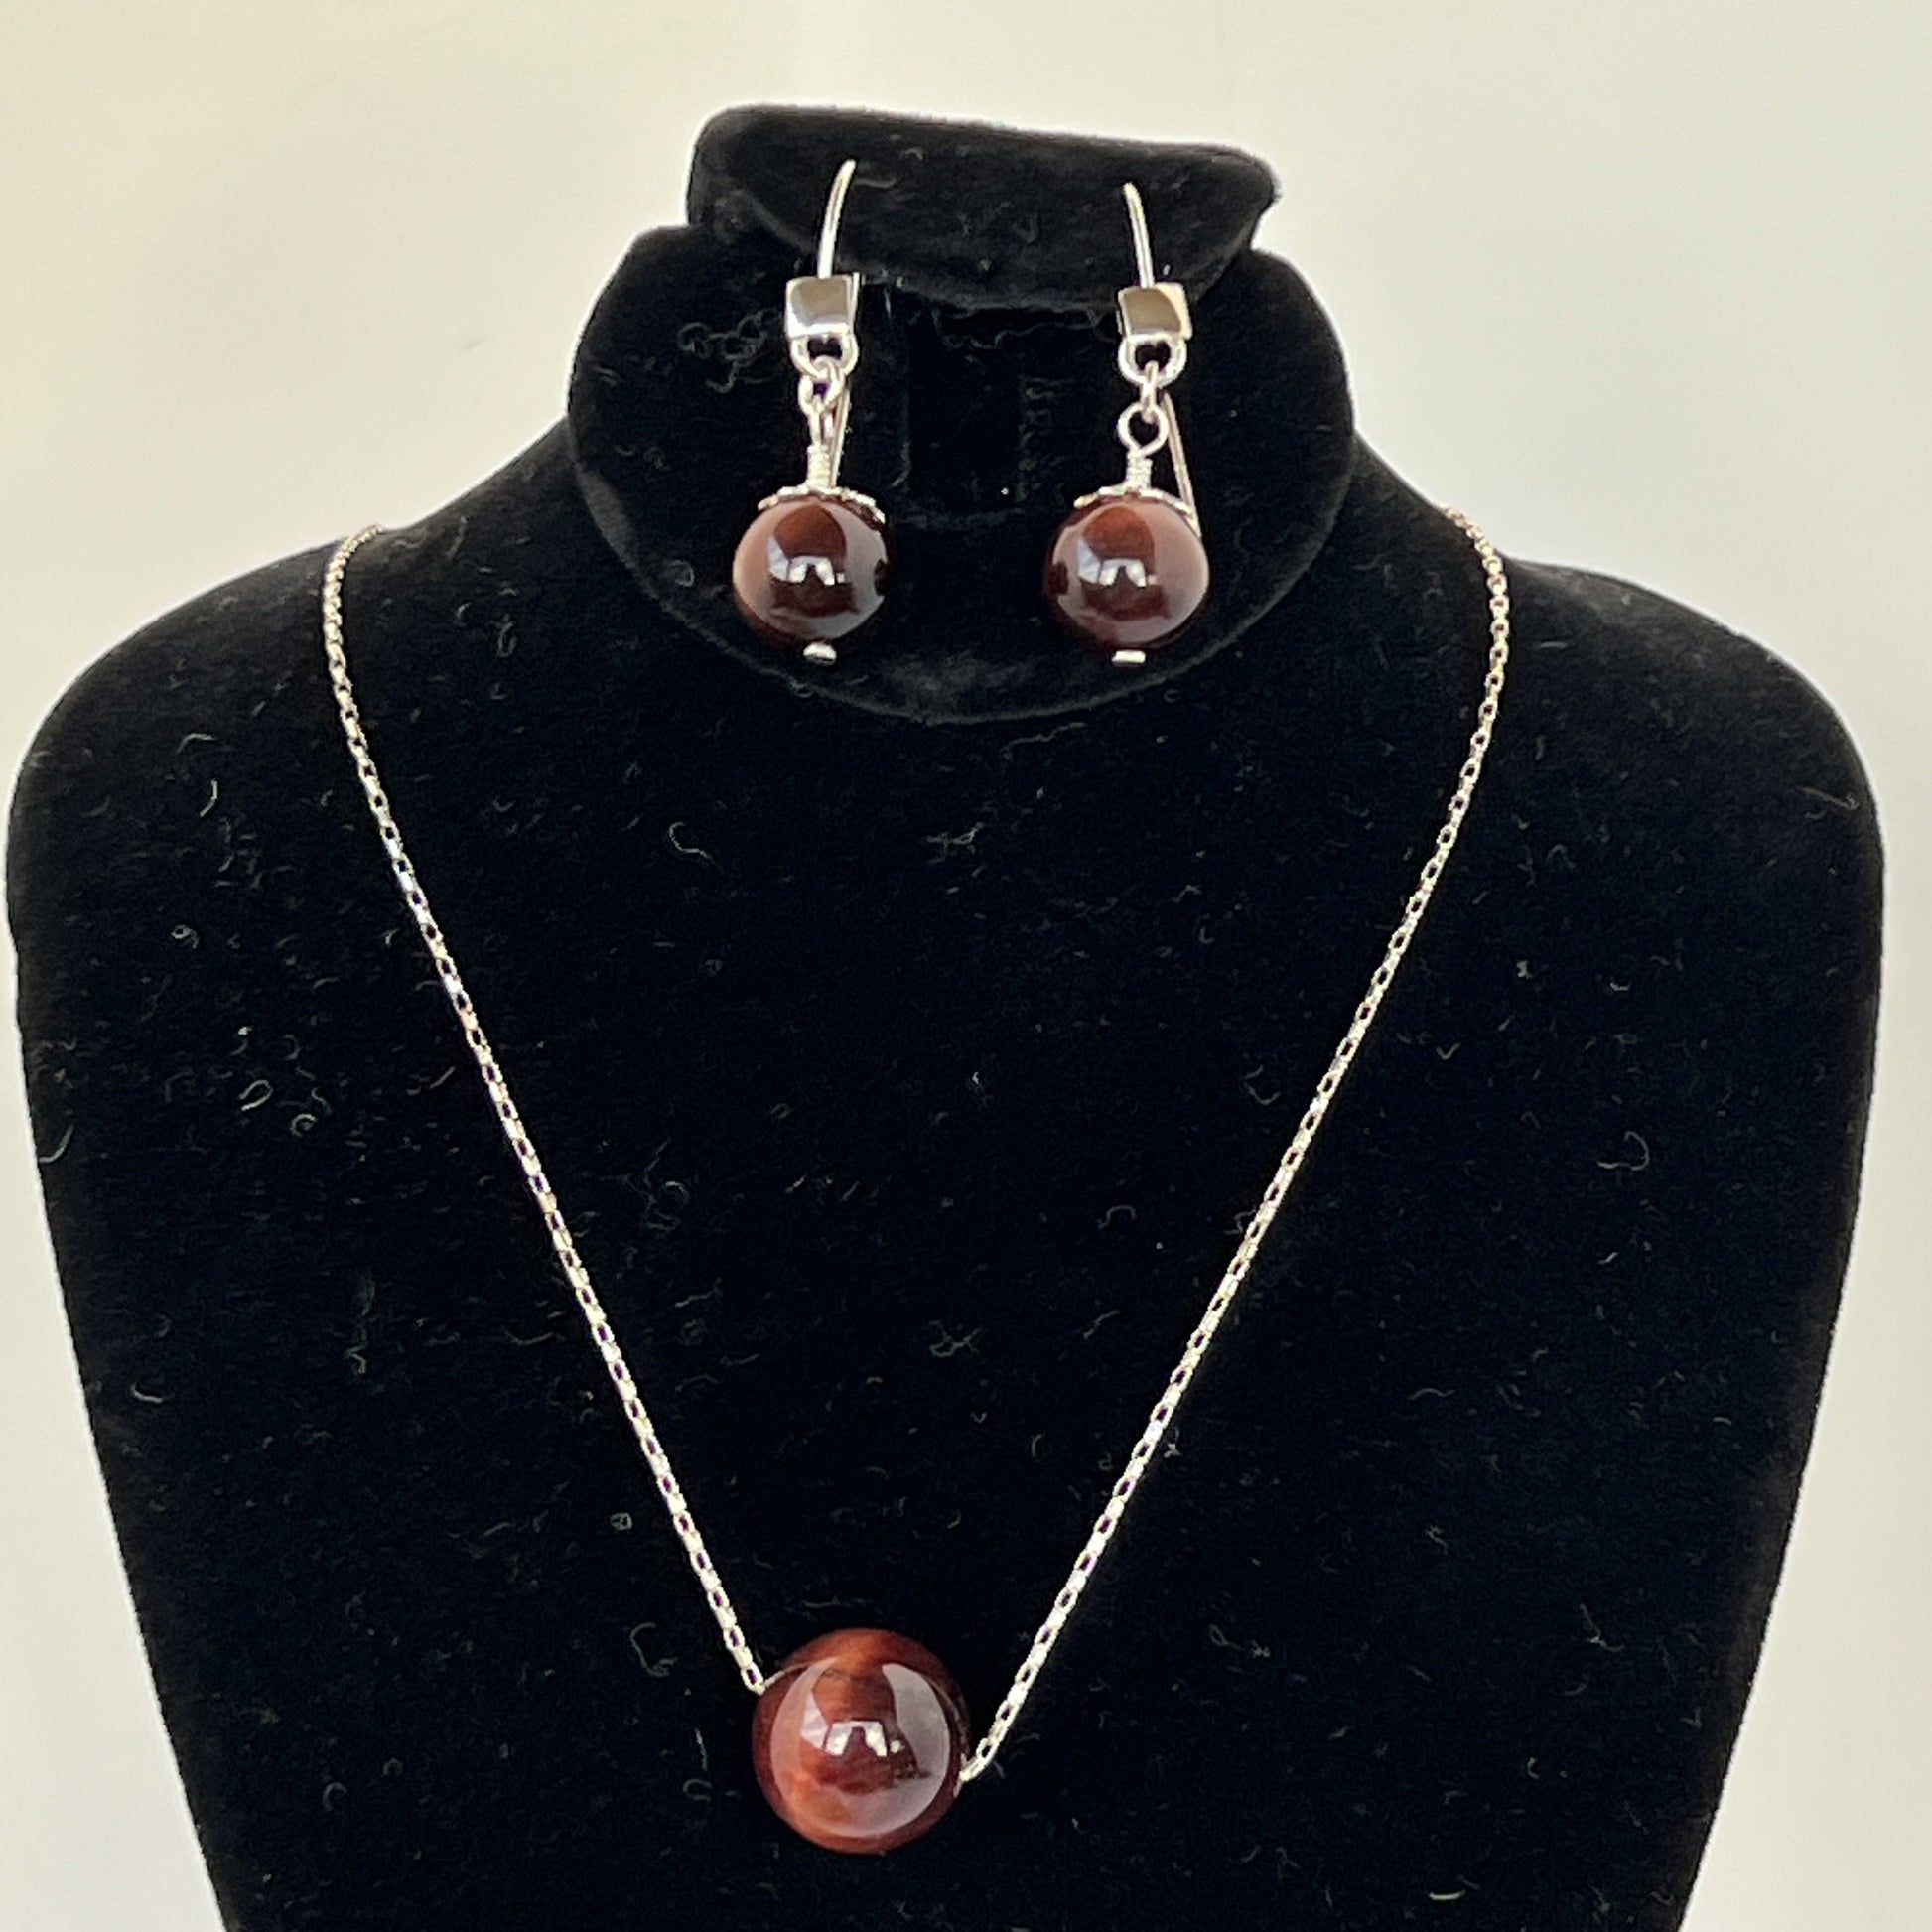 10mm red tiger eye earrings & 12mm pendant with sterling silver magnet clasp